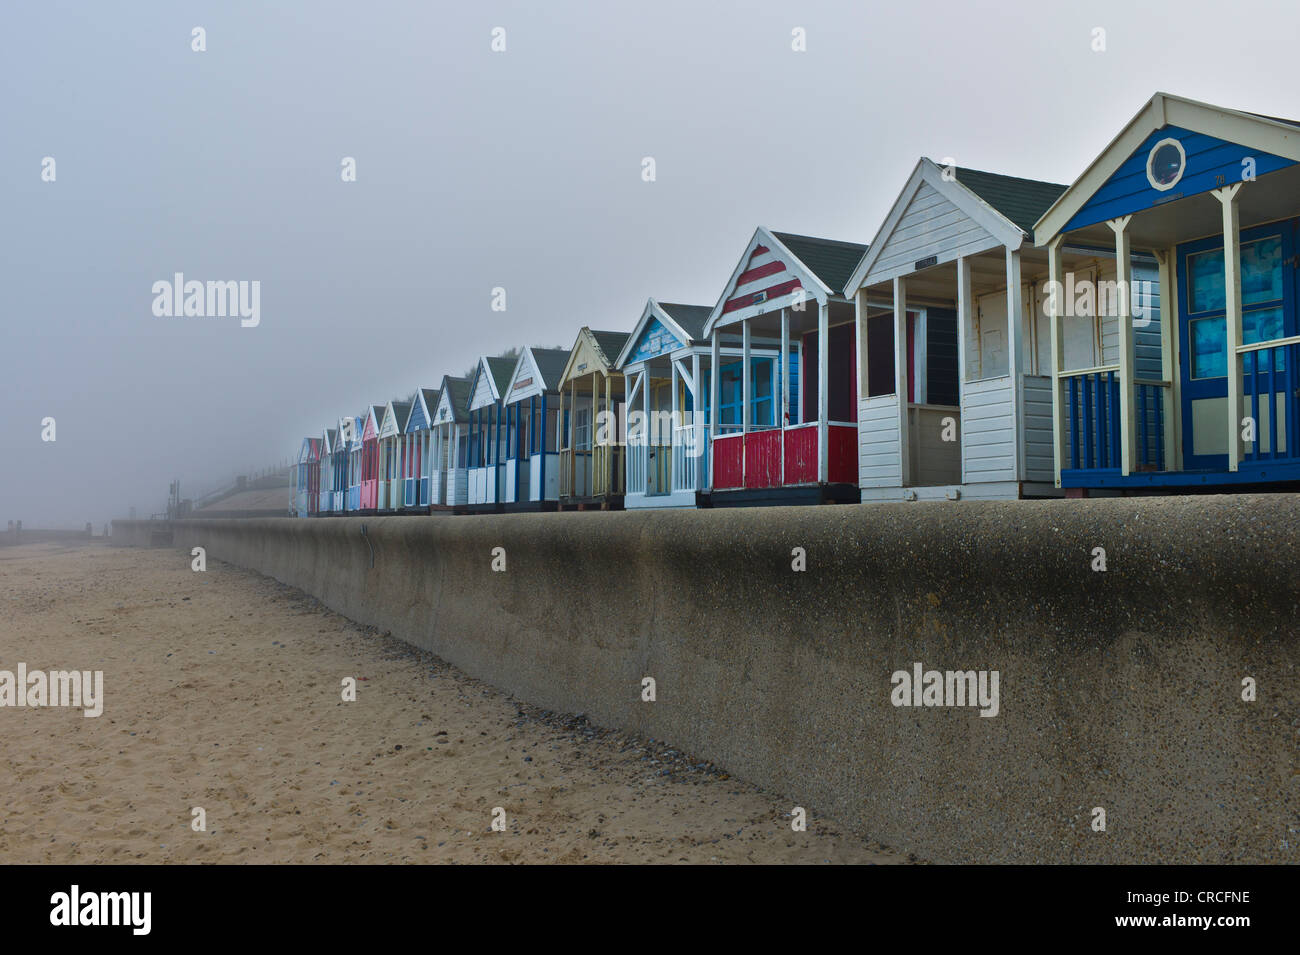 The colourful beach huts at Southwold are isolated from the surroundings by a thick sea fret or fog. Stock Photo